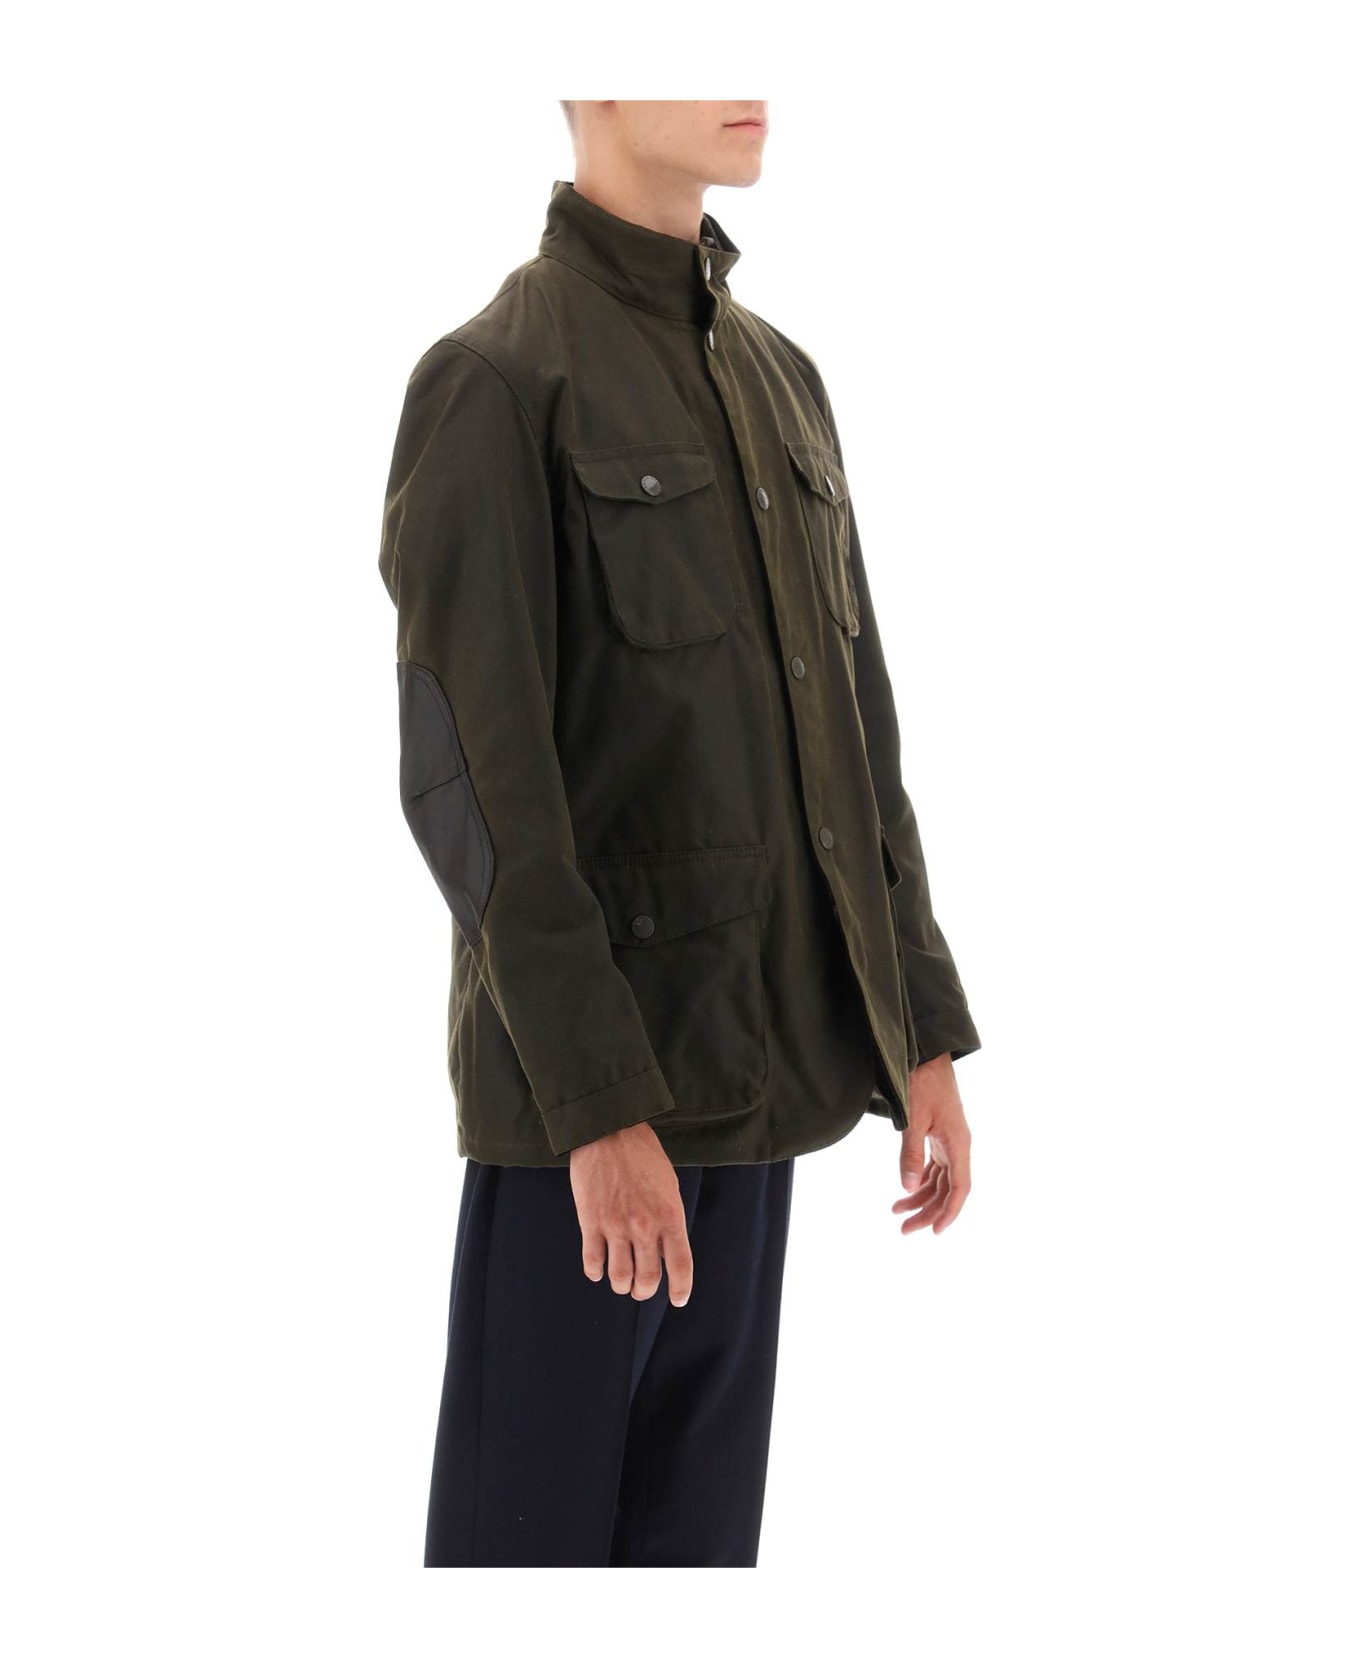 Barbour 'ogston' Waxed Jacket - Olive